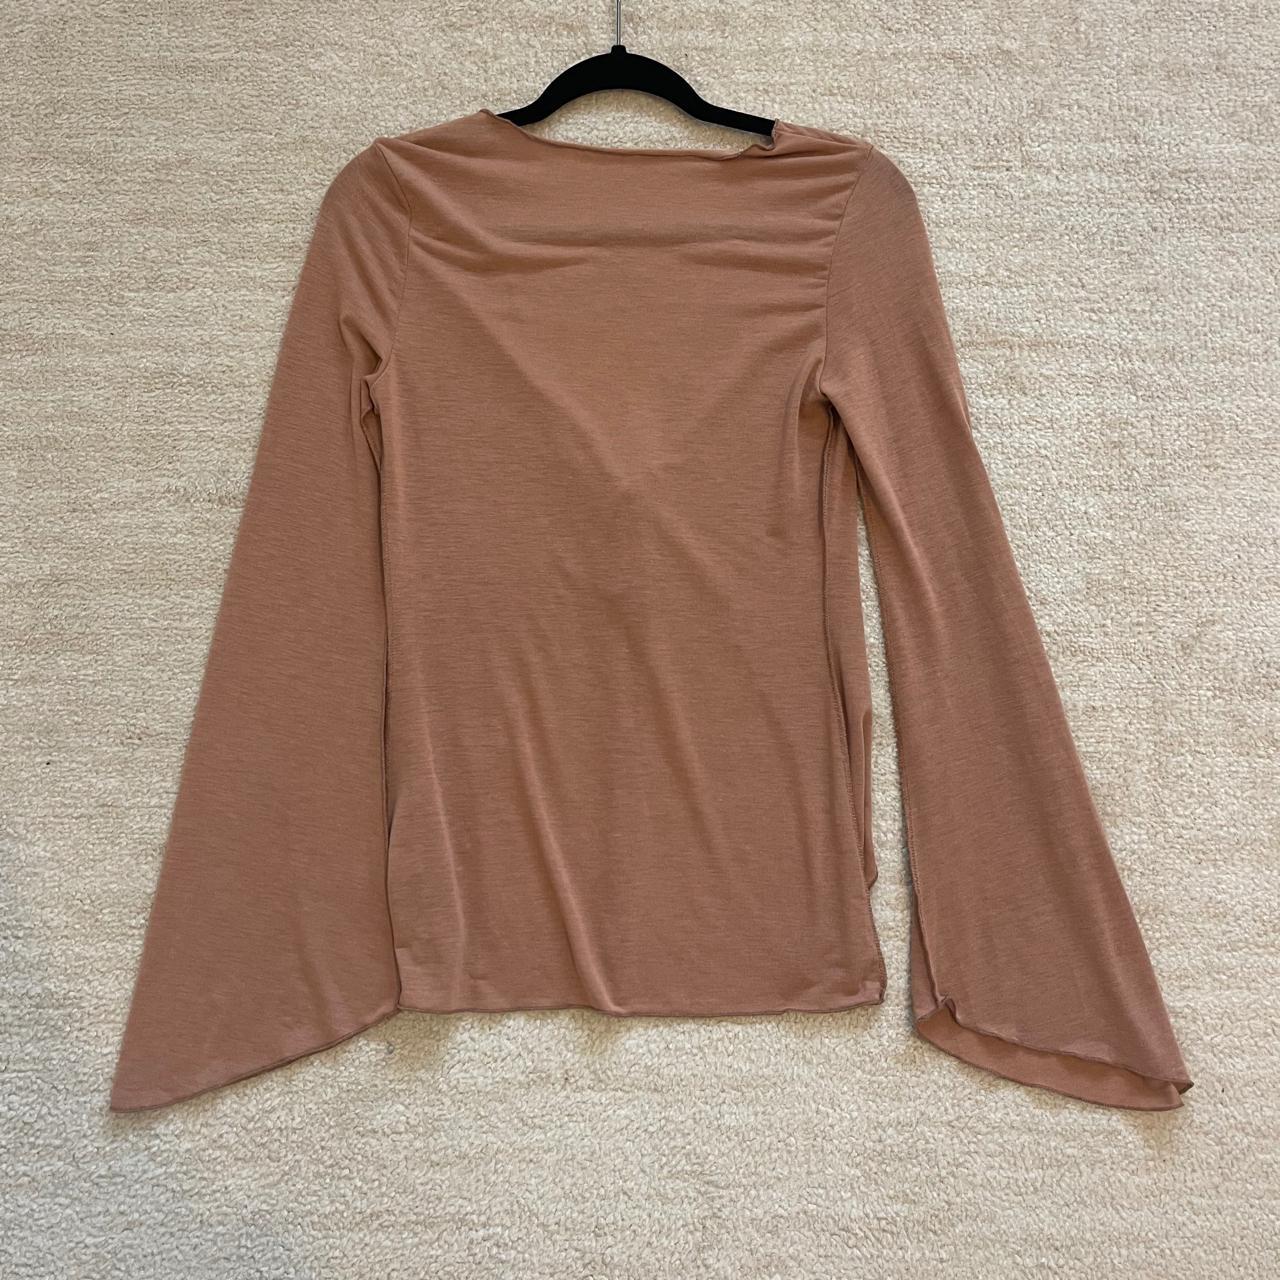 SHEIN Women's Brown and Tan Blouse (2)